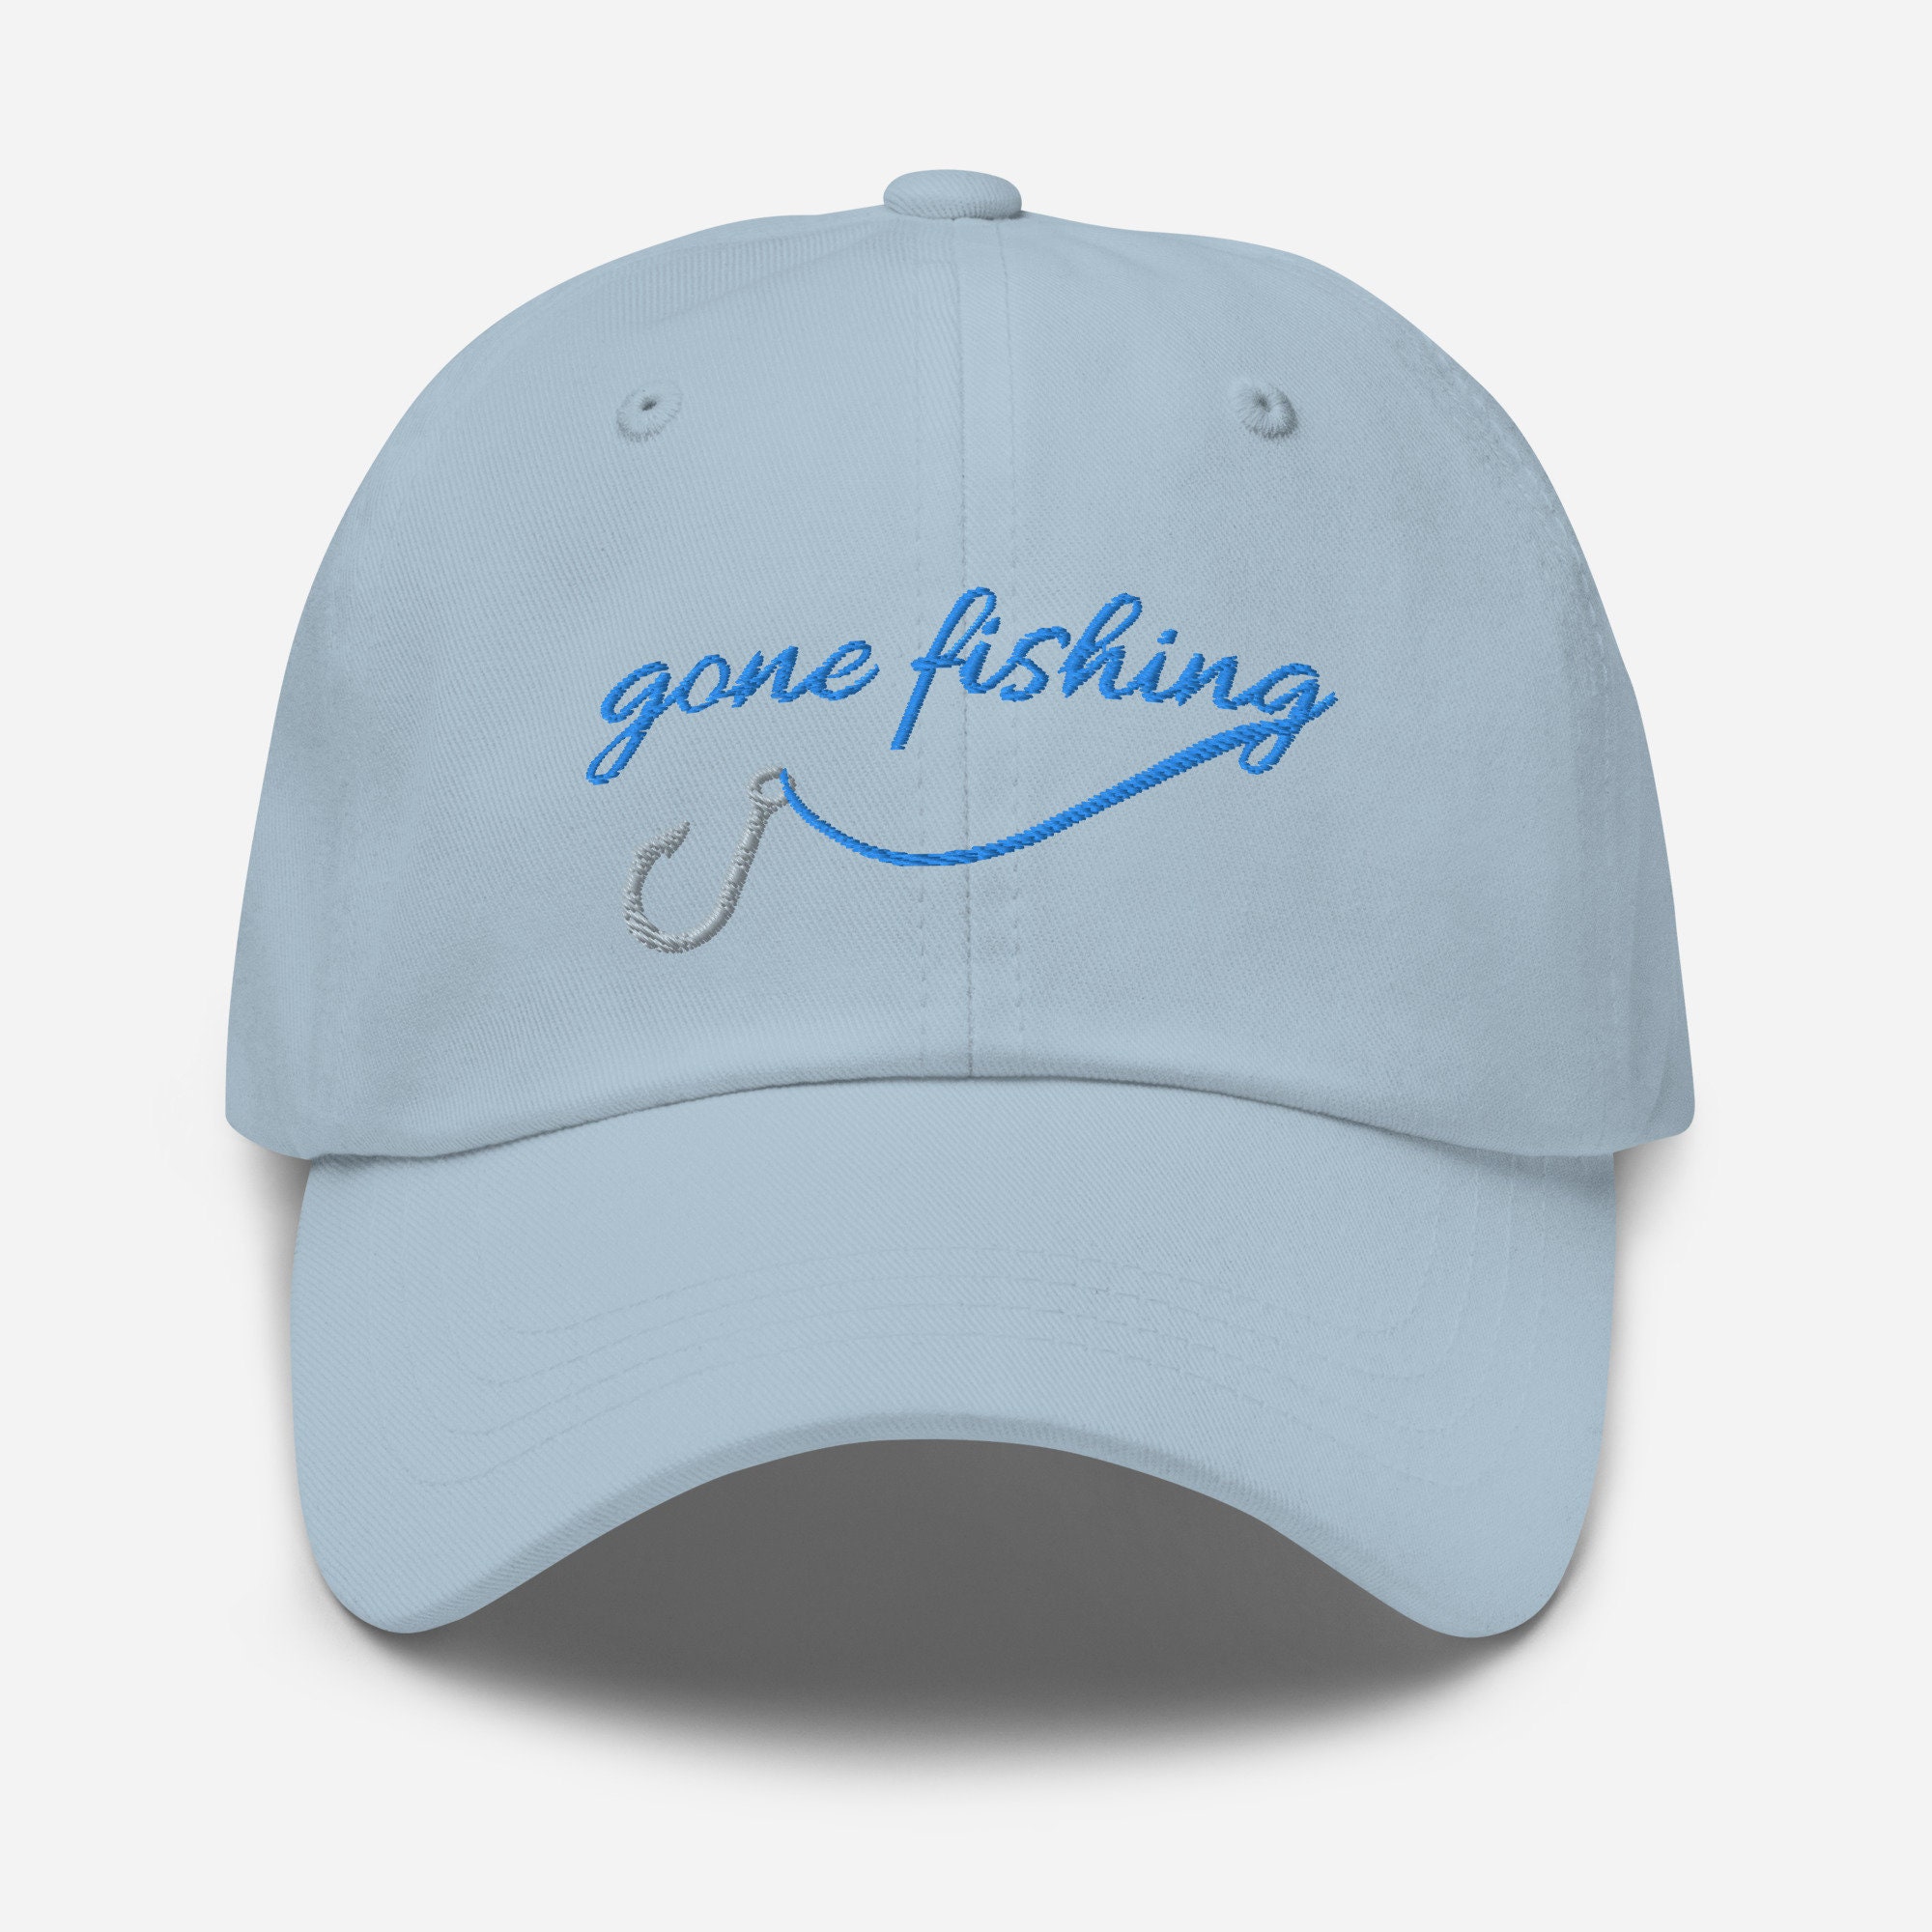 Gone Fishing Dad Hat - Gift for Fishermen, Anglers and Nature Lovers - Minimalist Embroidered Cotton Hat